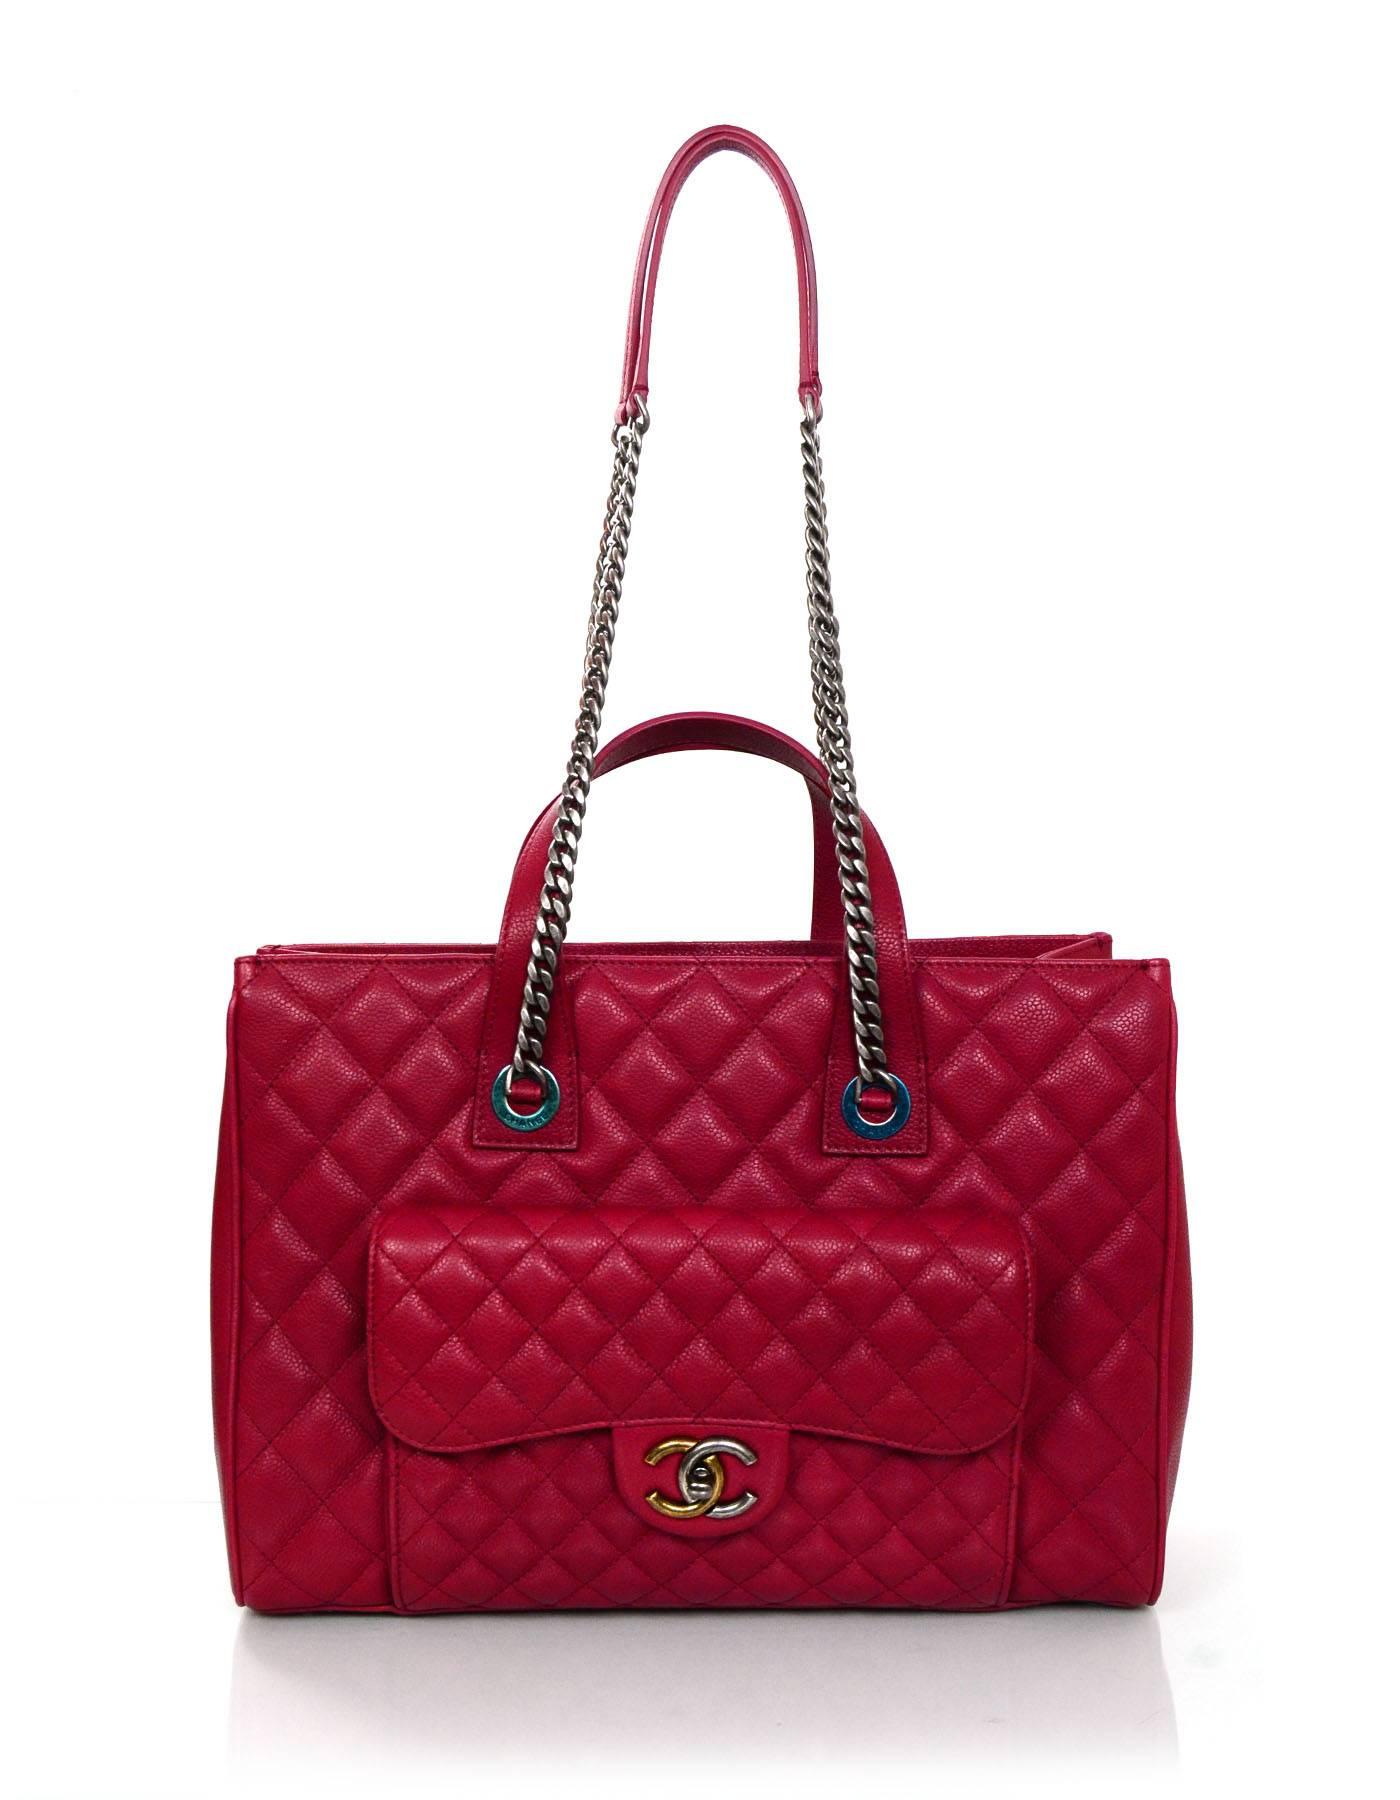 Chanel NEW Red Caviar Leather Tote
Features front flap pocket that closes with a two tone antiqued CC twist lock

Made In: Italy
Year of Production: 2016
Color: Red
Hardware: Antique silvertone and goldtone
Materials: Caviar leather,